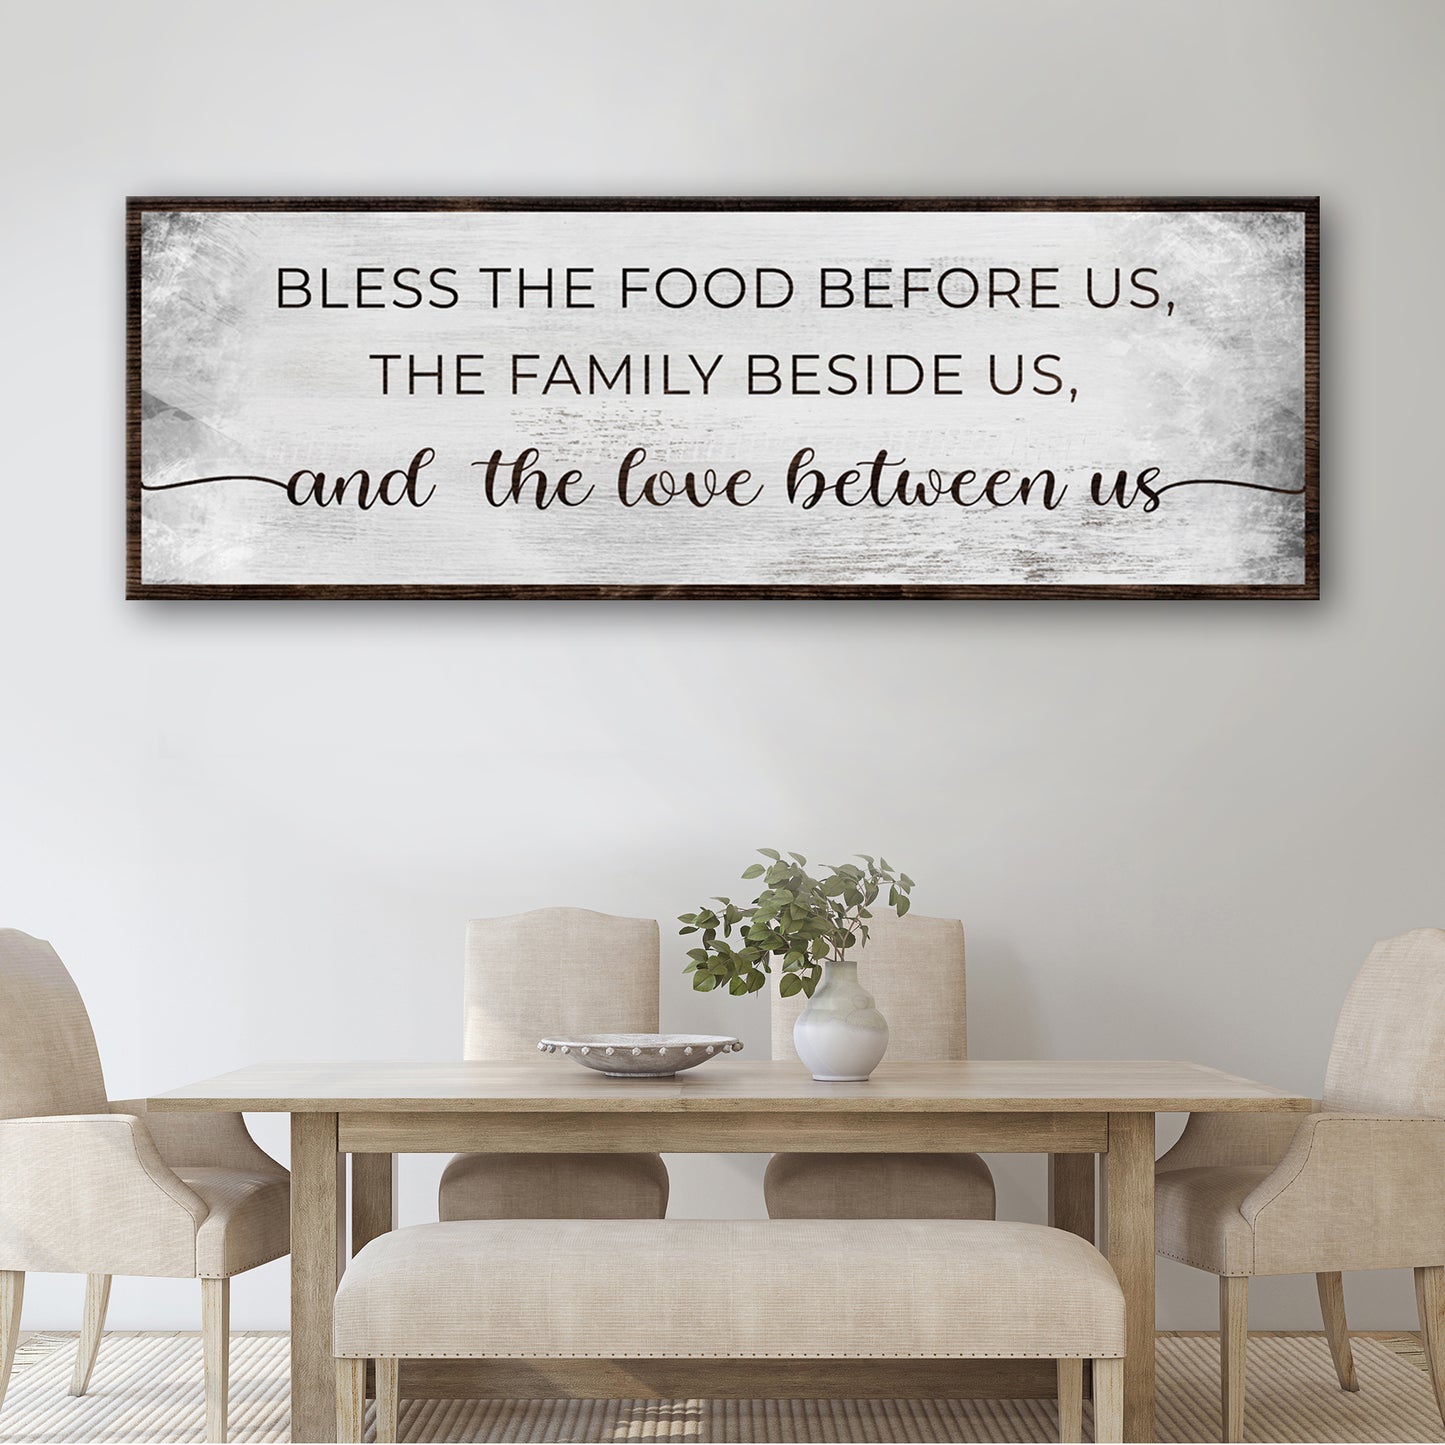 Bless The Love Between Us Sign - Image by Tailored Canvases